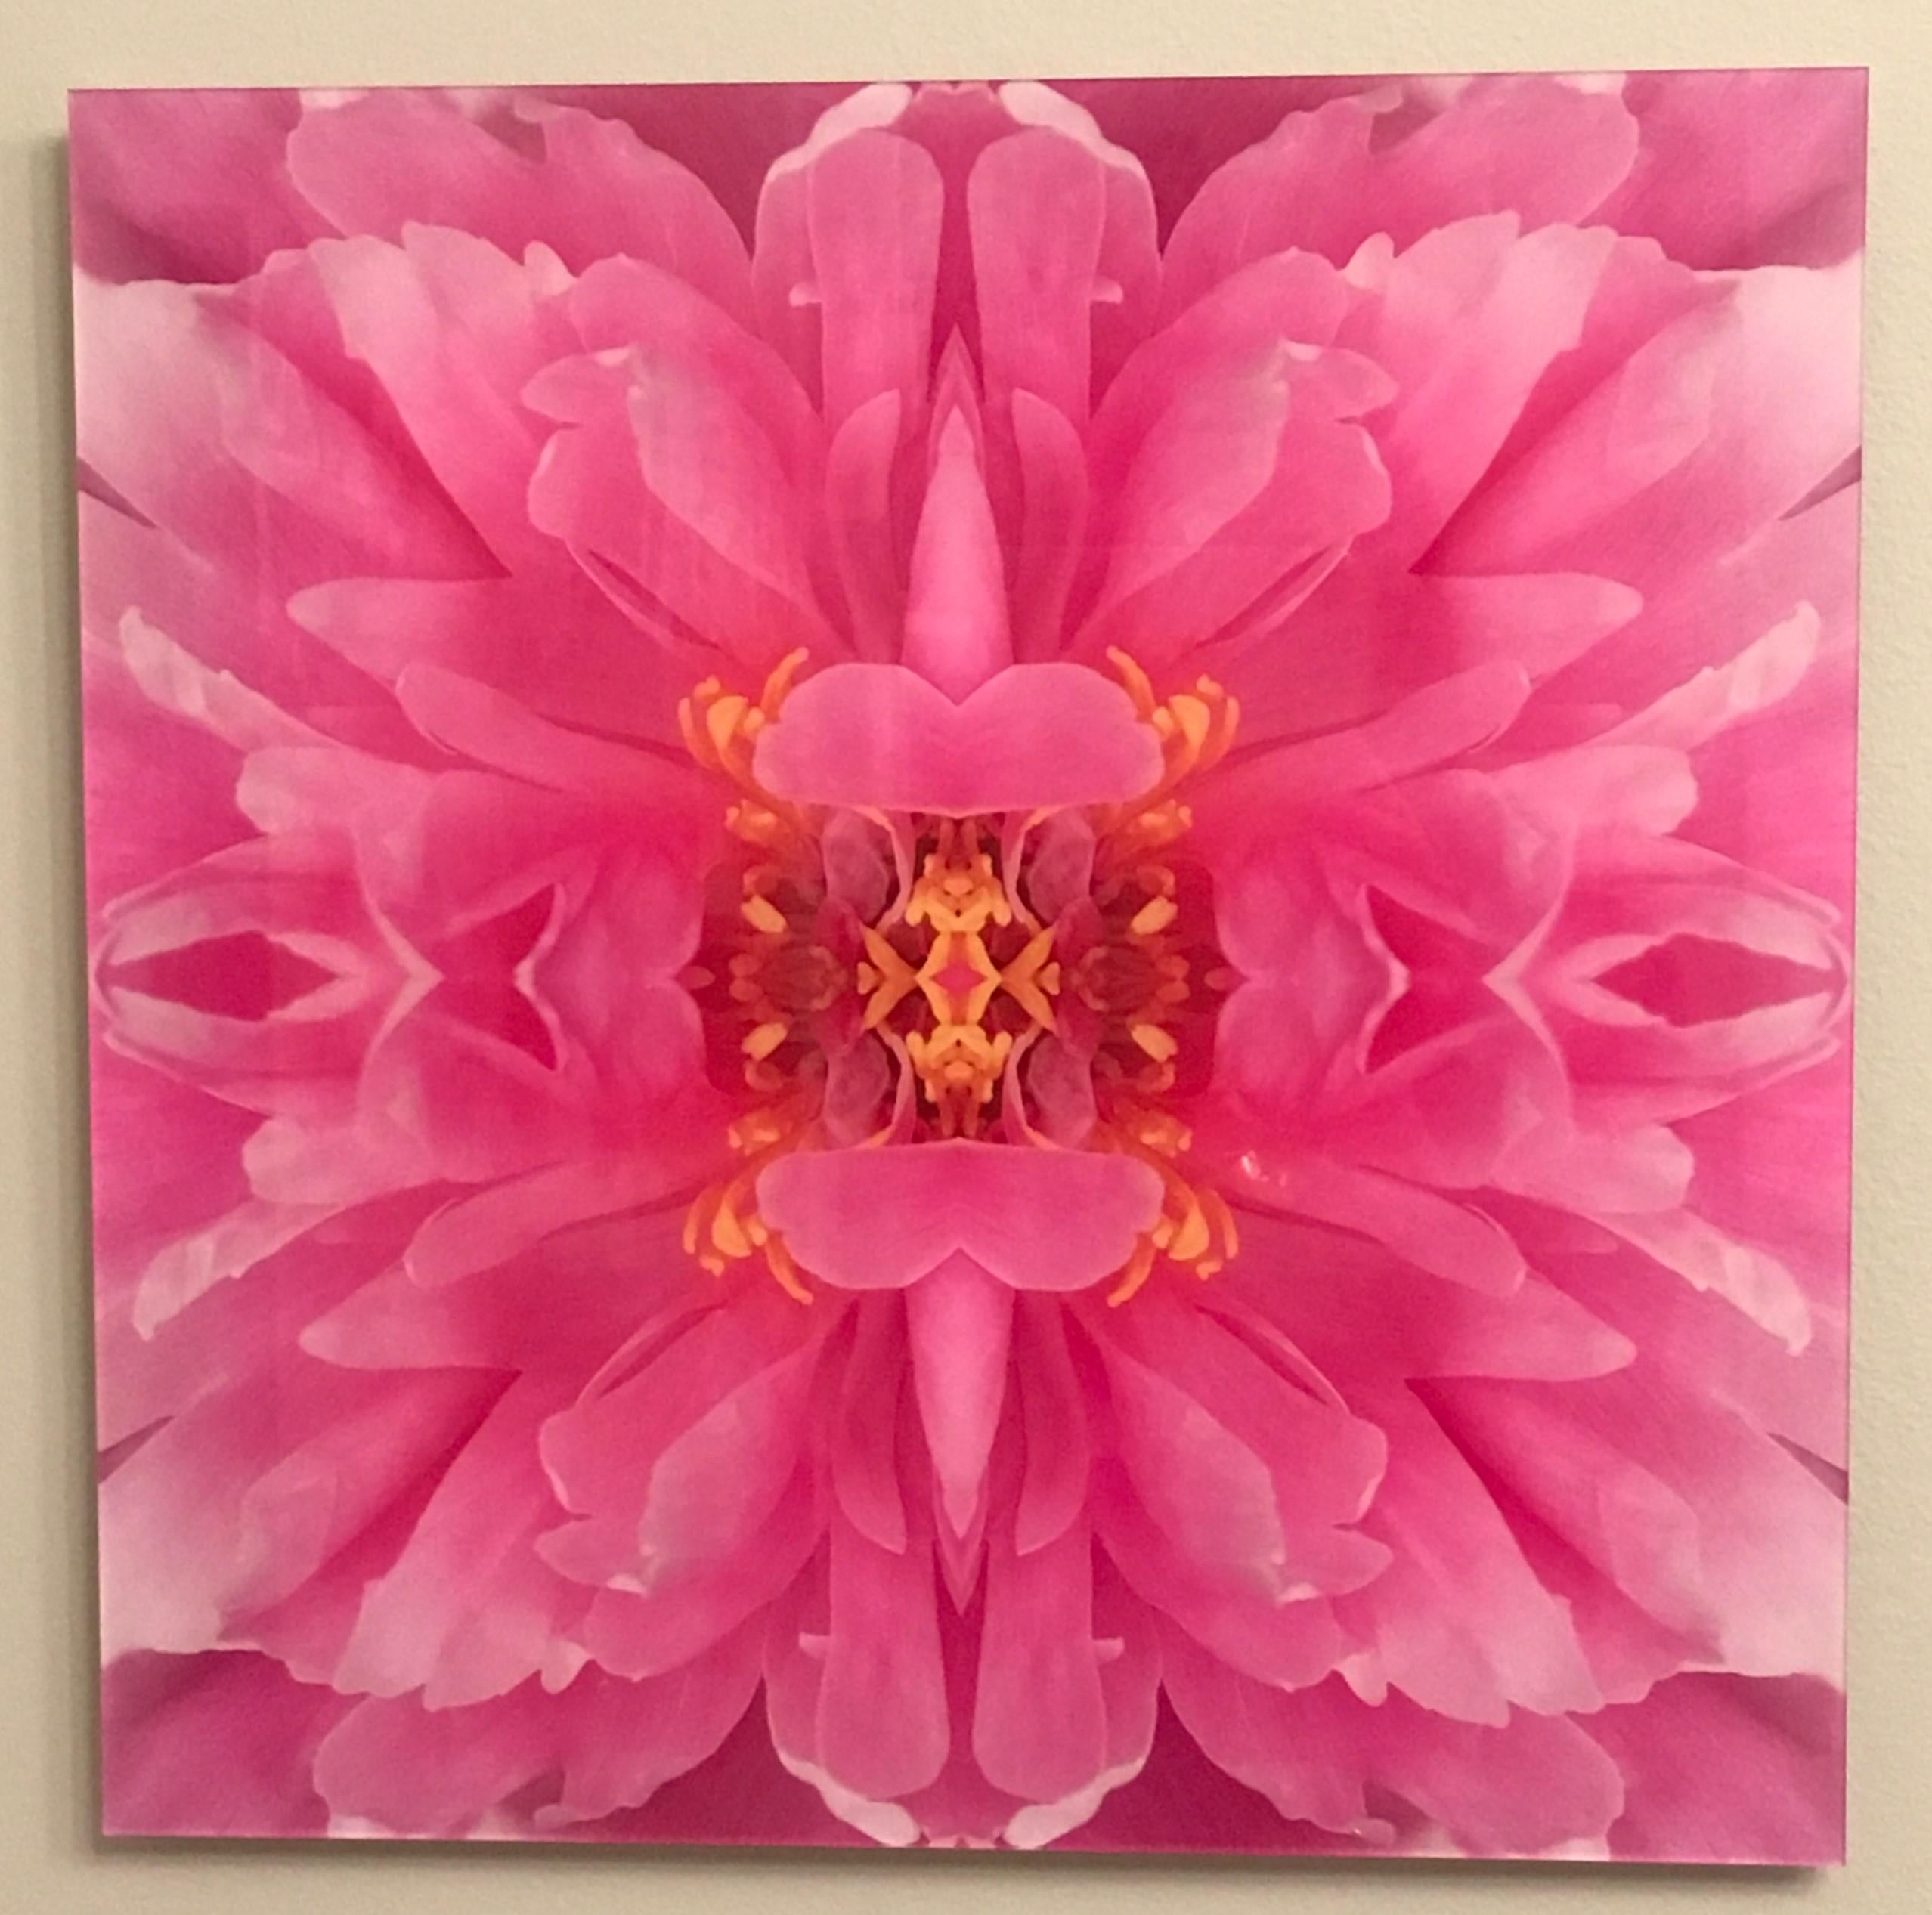 Rebecca Swanson, Pure Poppy II, Limited Edition Photograph, 15x15.  It is available with Plexifacemount or white frame .  This stunning image is filled Pink and green.  This is an edition of 15.  Also available in 30x30.   Printing and framing upon